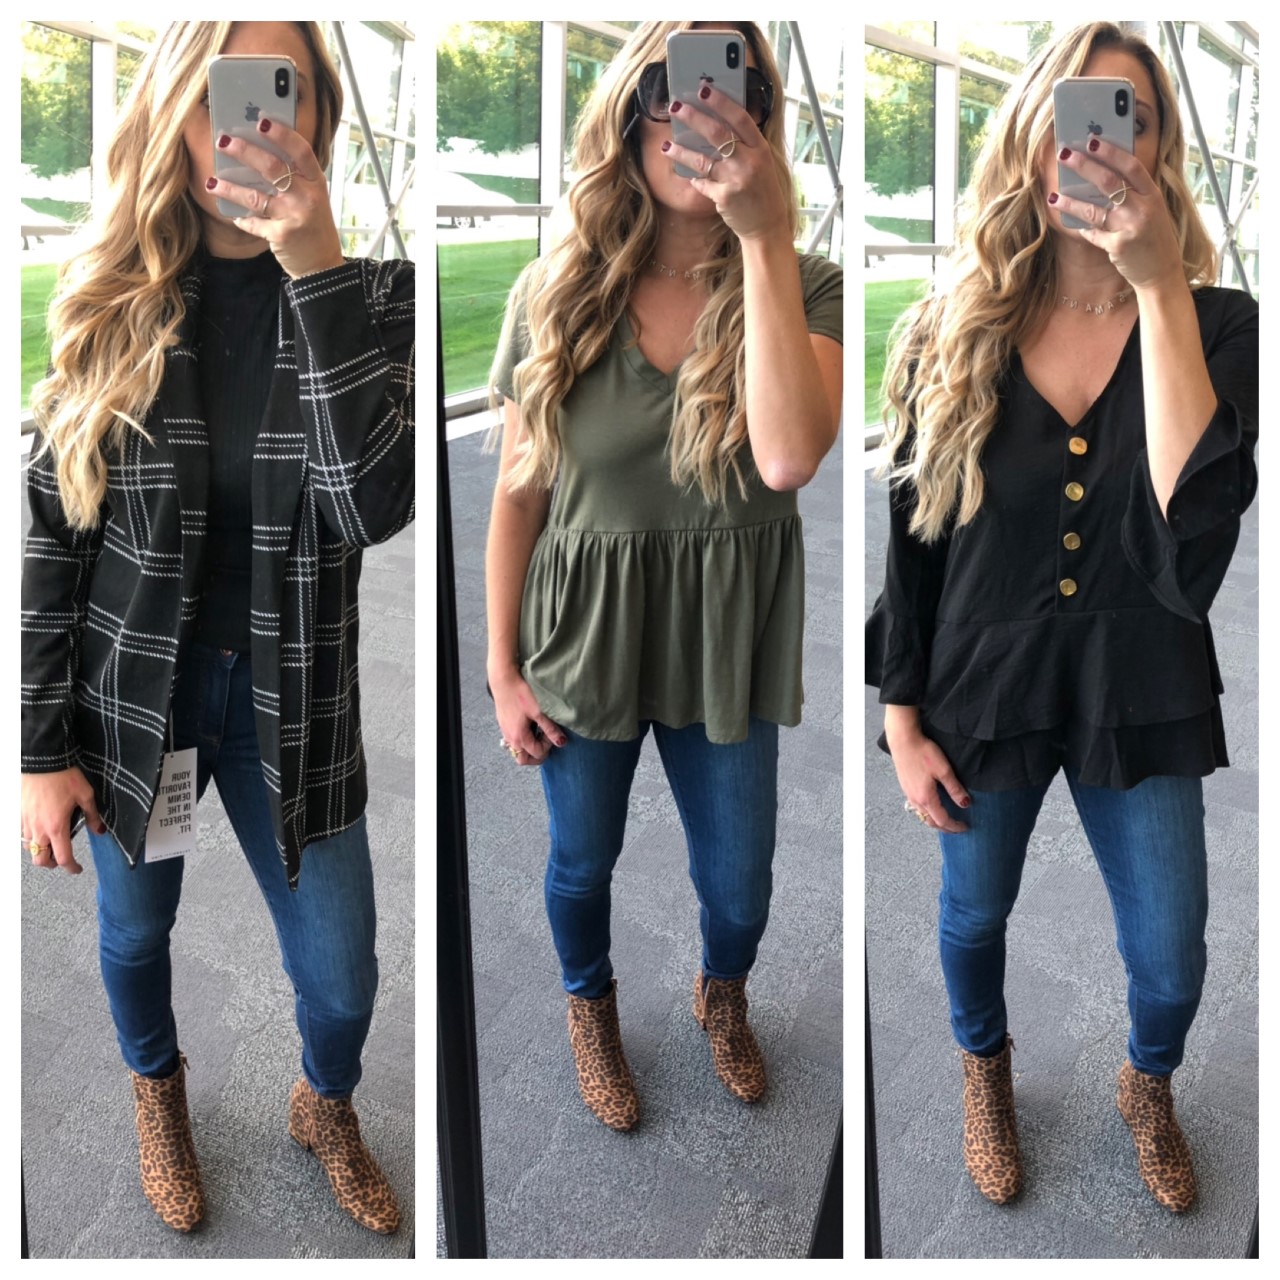 3 different looks from fall fashion at Meijer